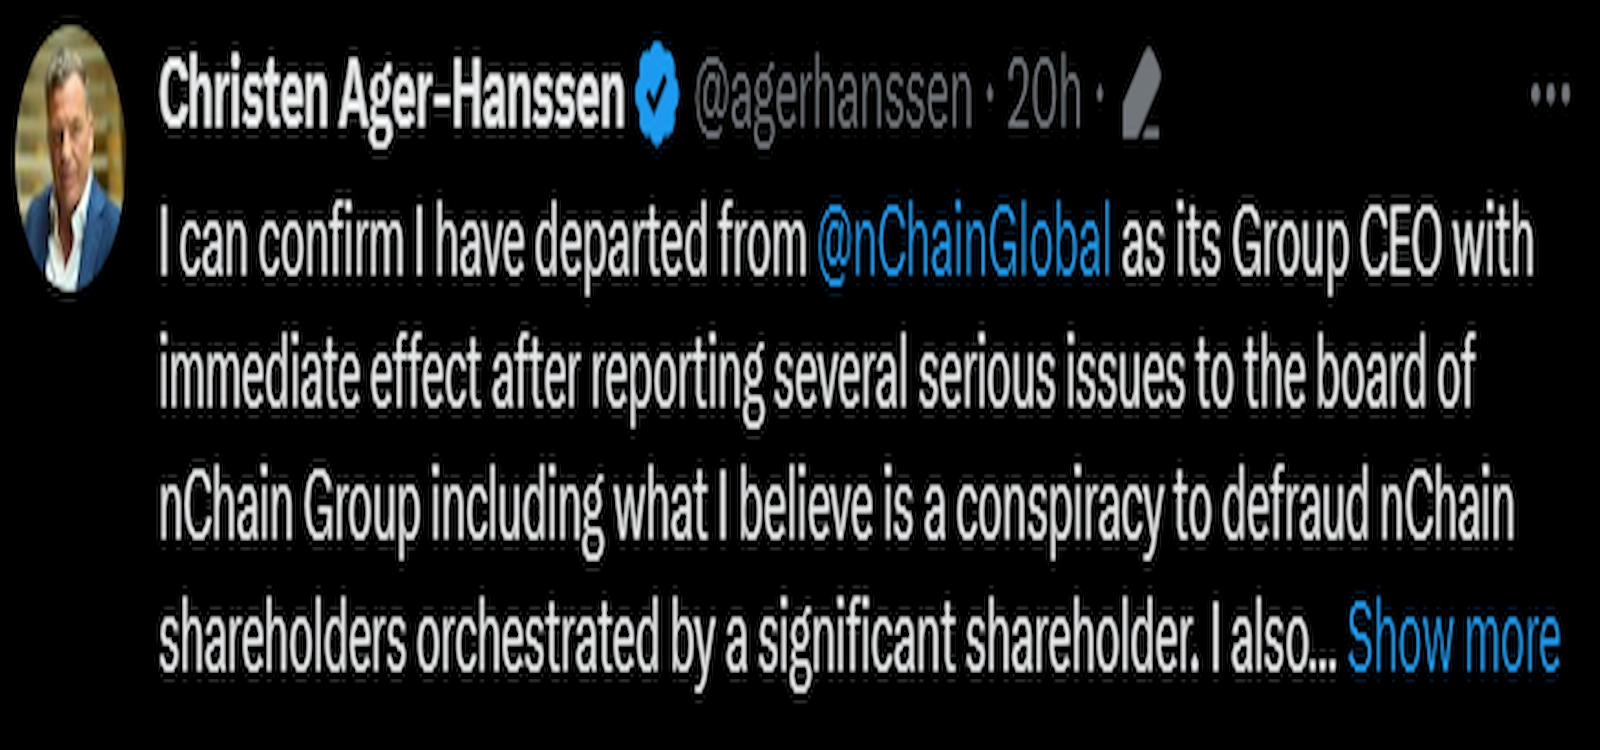 Christen Ager-Hanssen shared news of his departure from nChain